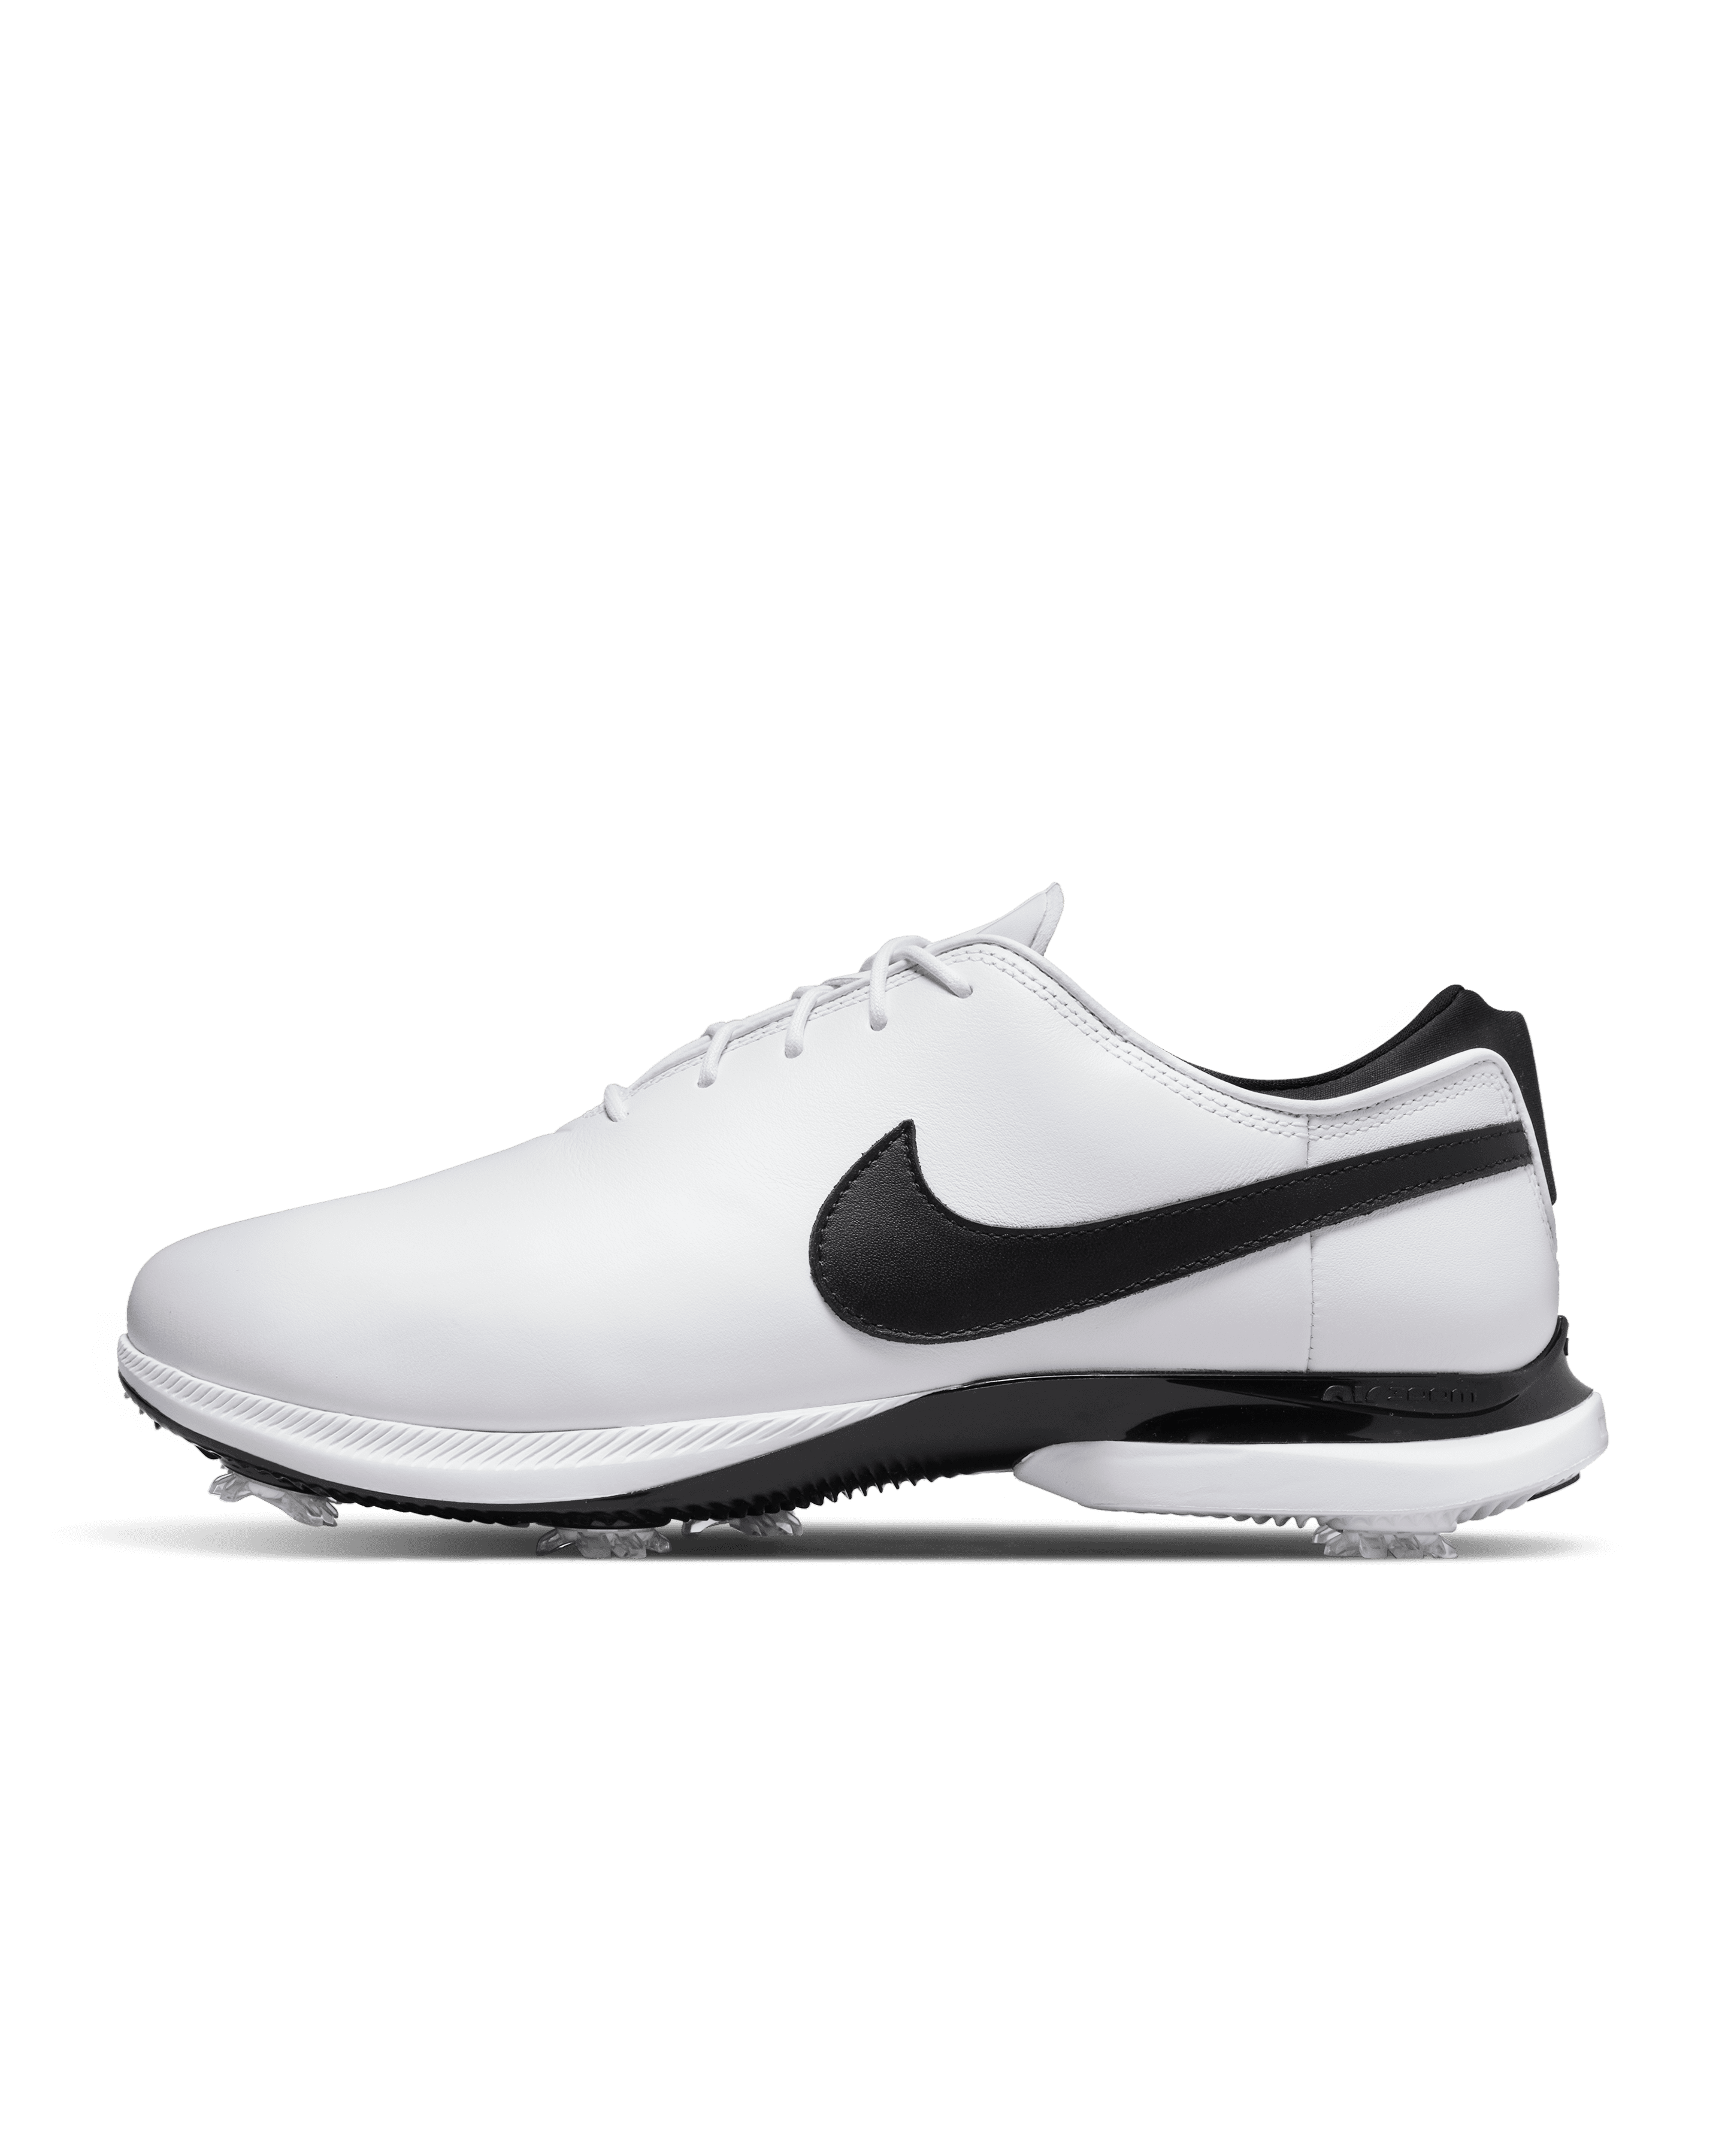 Nike Sale March 2023: Save to 40% Off Shoes, Air Force 1 Apparel